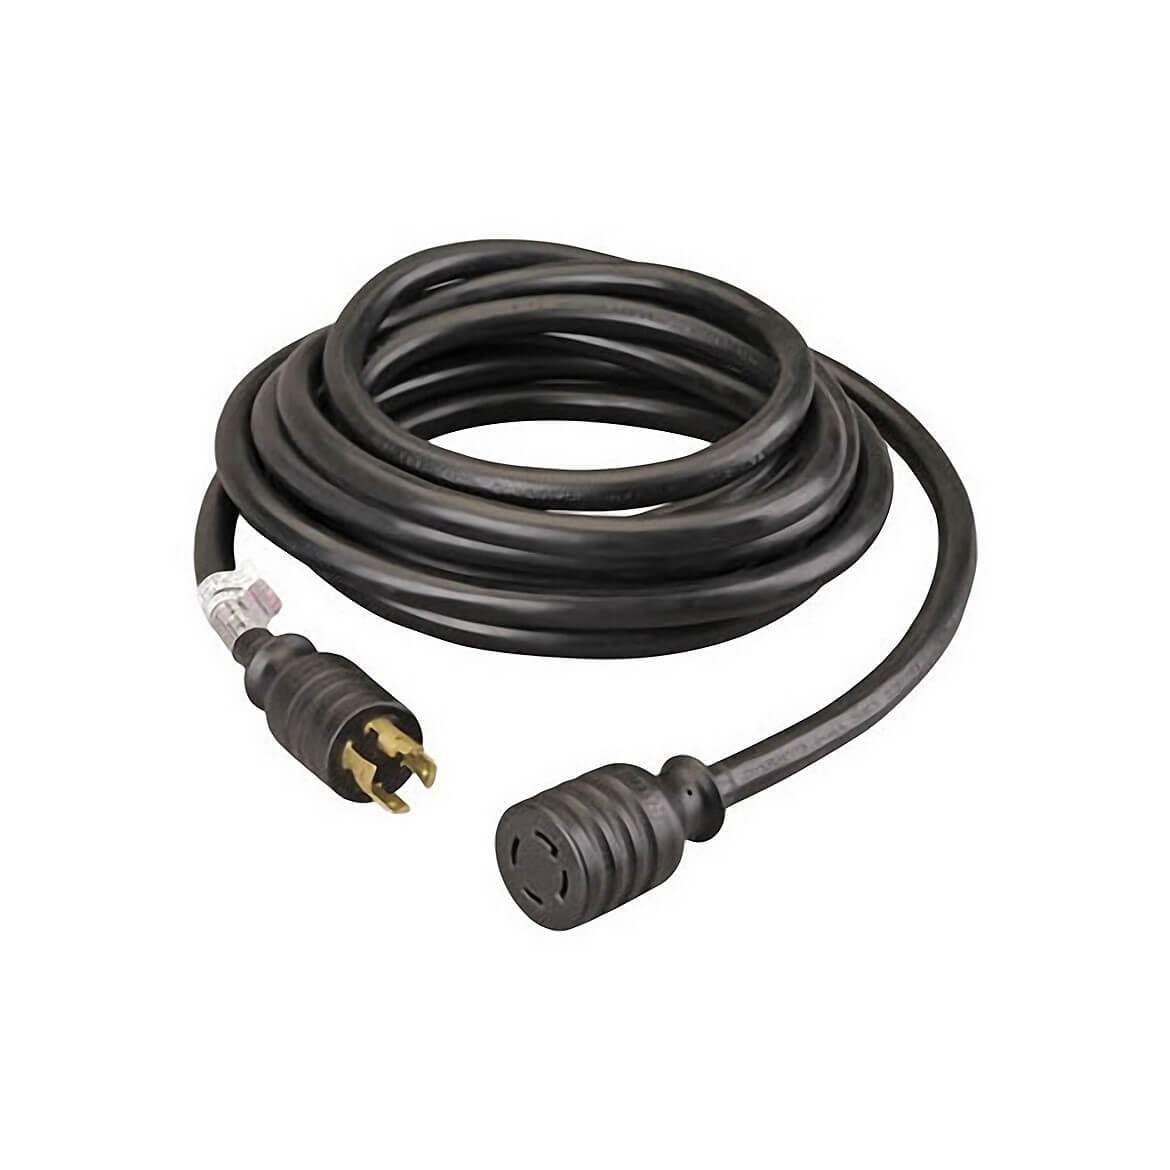 Reliance PC3040 40-Foot 30-Amp 120/240-Volt Power Cord